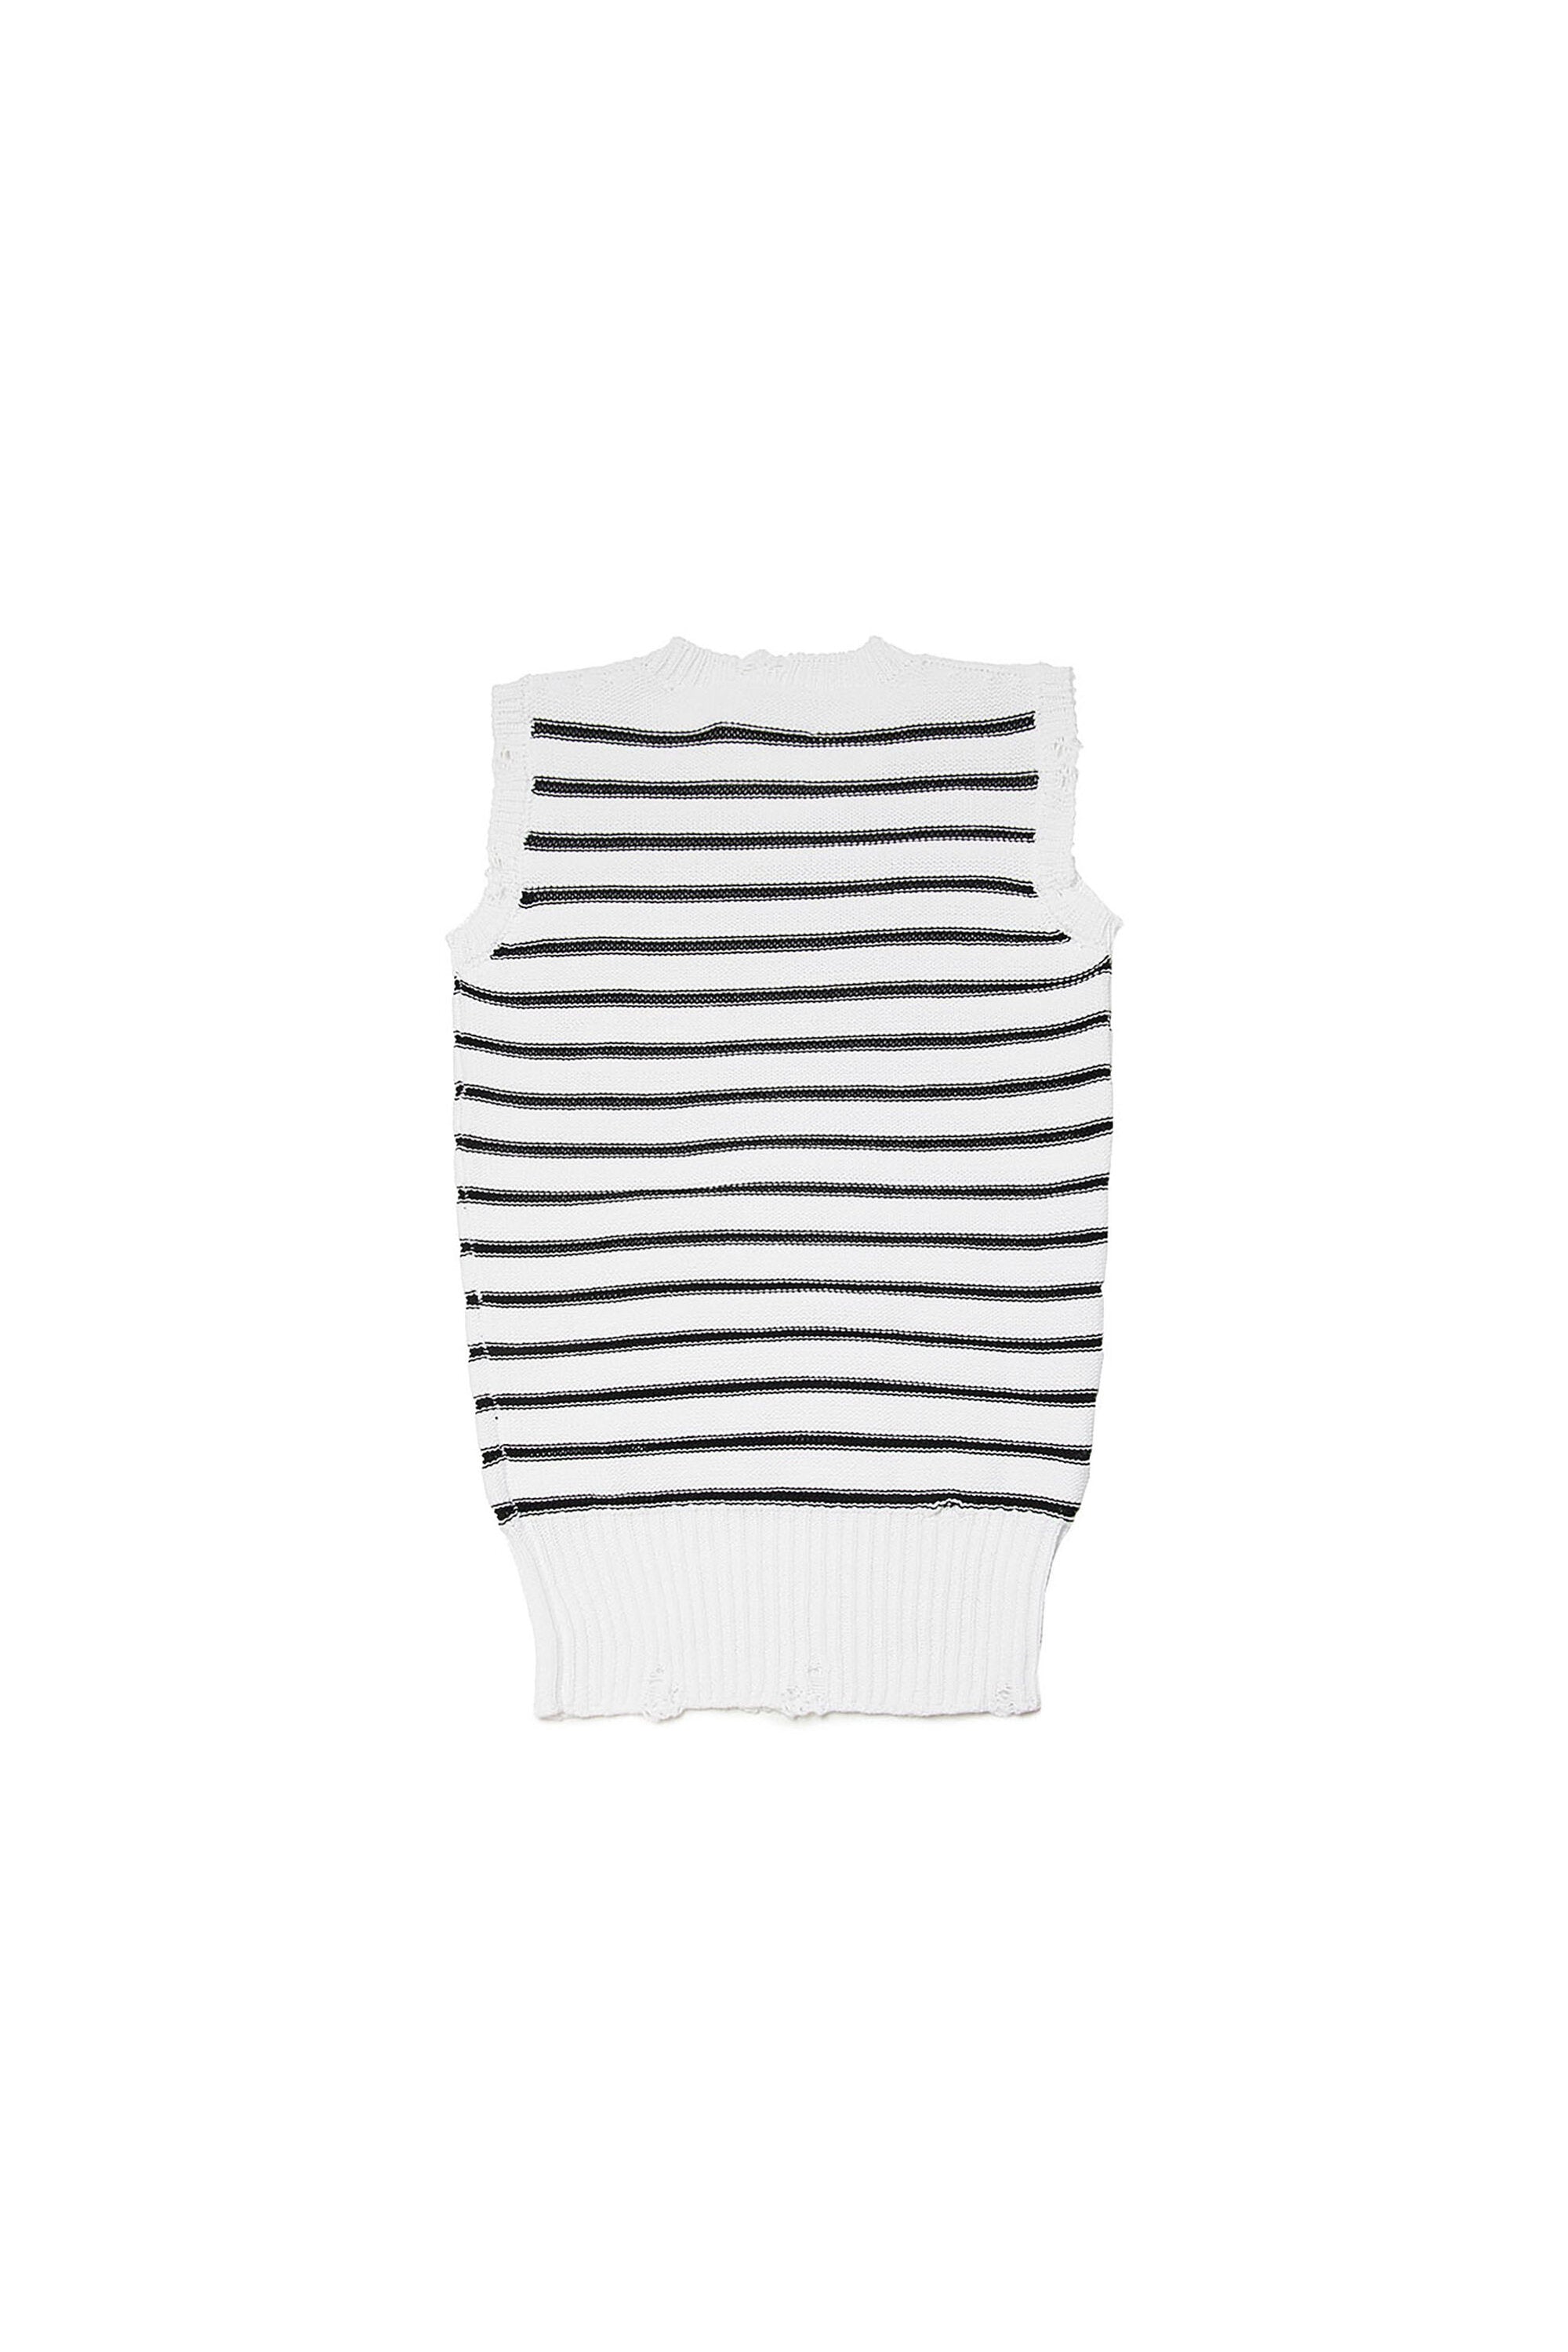 Striped vest with breaks